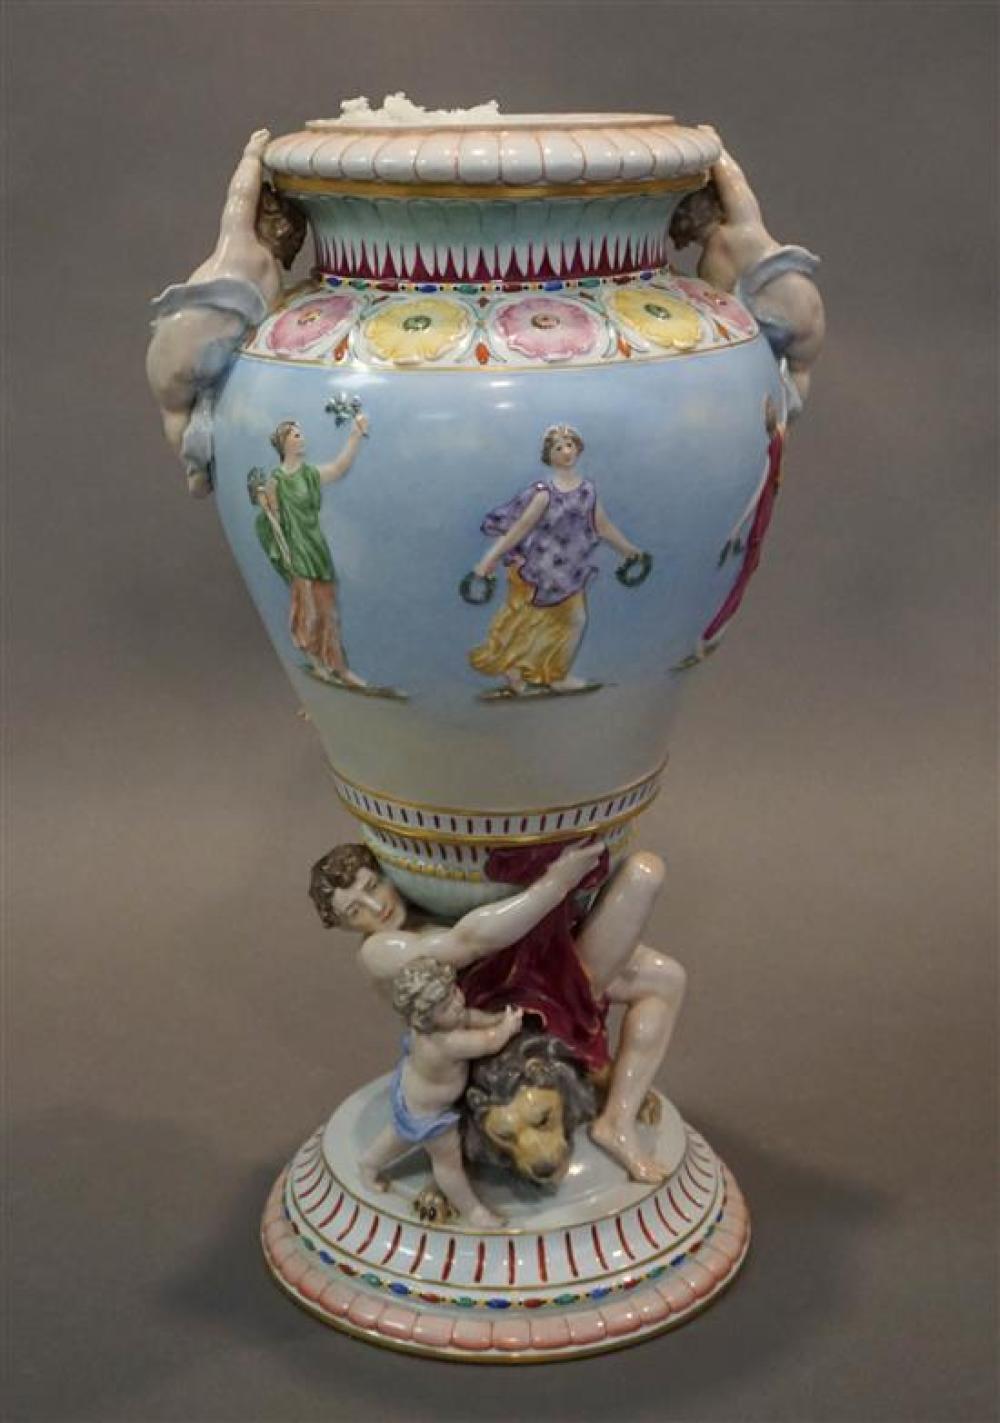 CAPODIMONTE TYPE ALLEGORICAL FOOTED